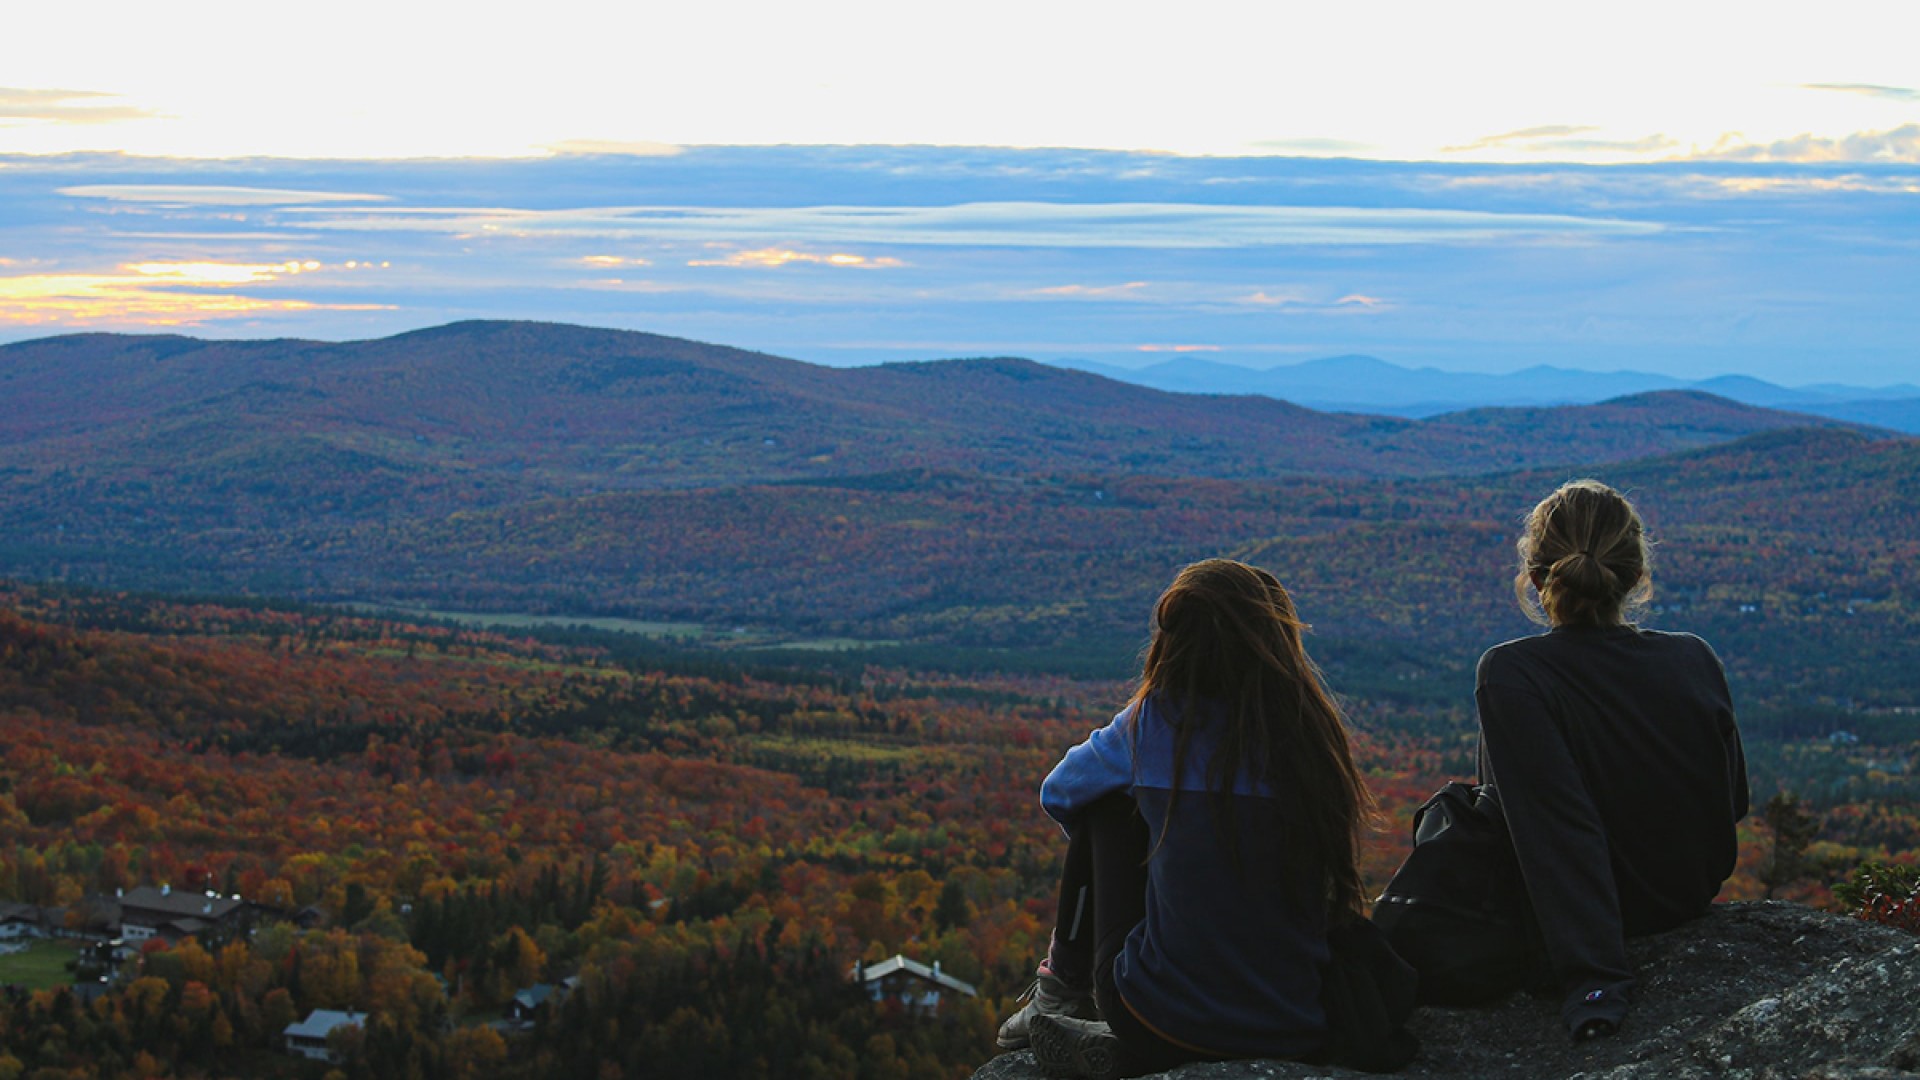 Two individuals sitting on a rock looking out over fall foliage mountain view. You can see the backs of the people